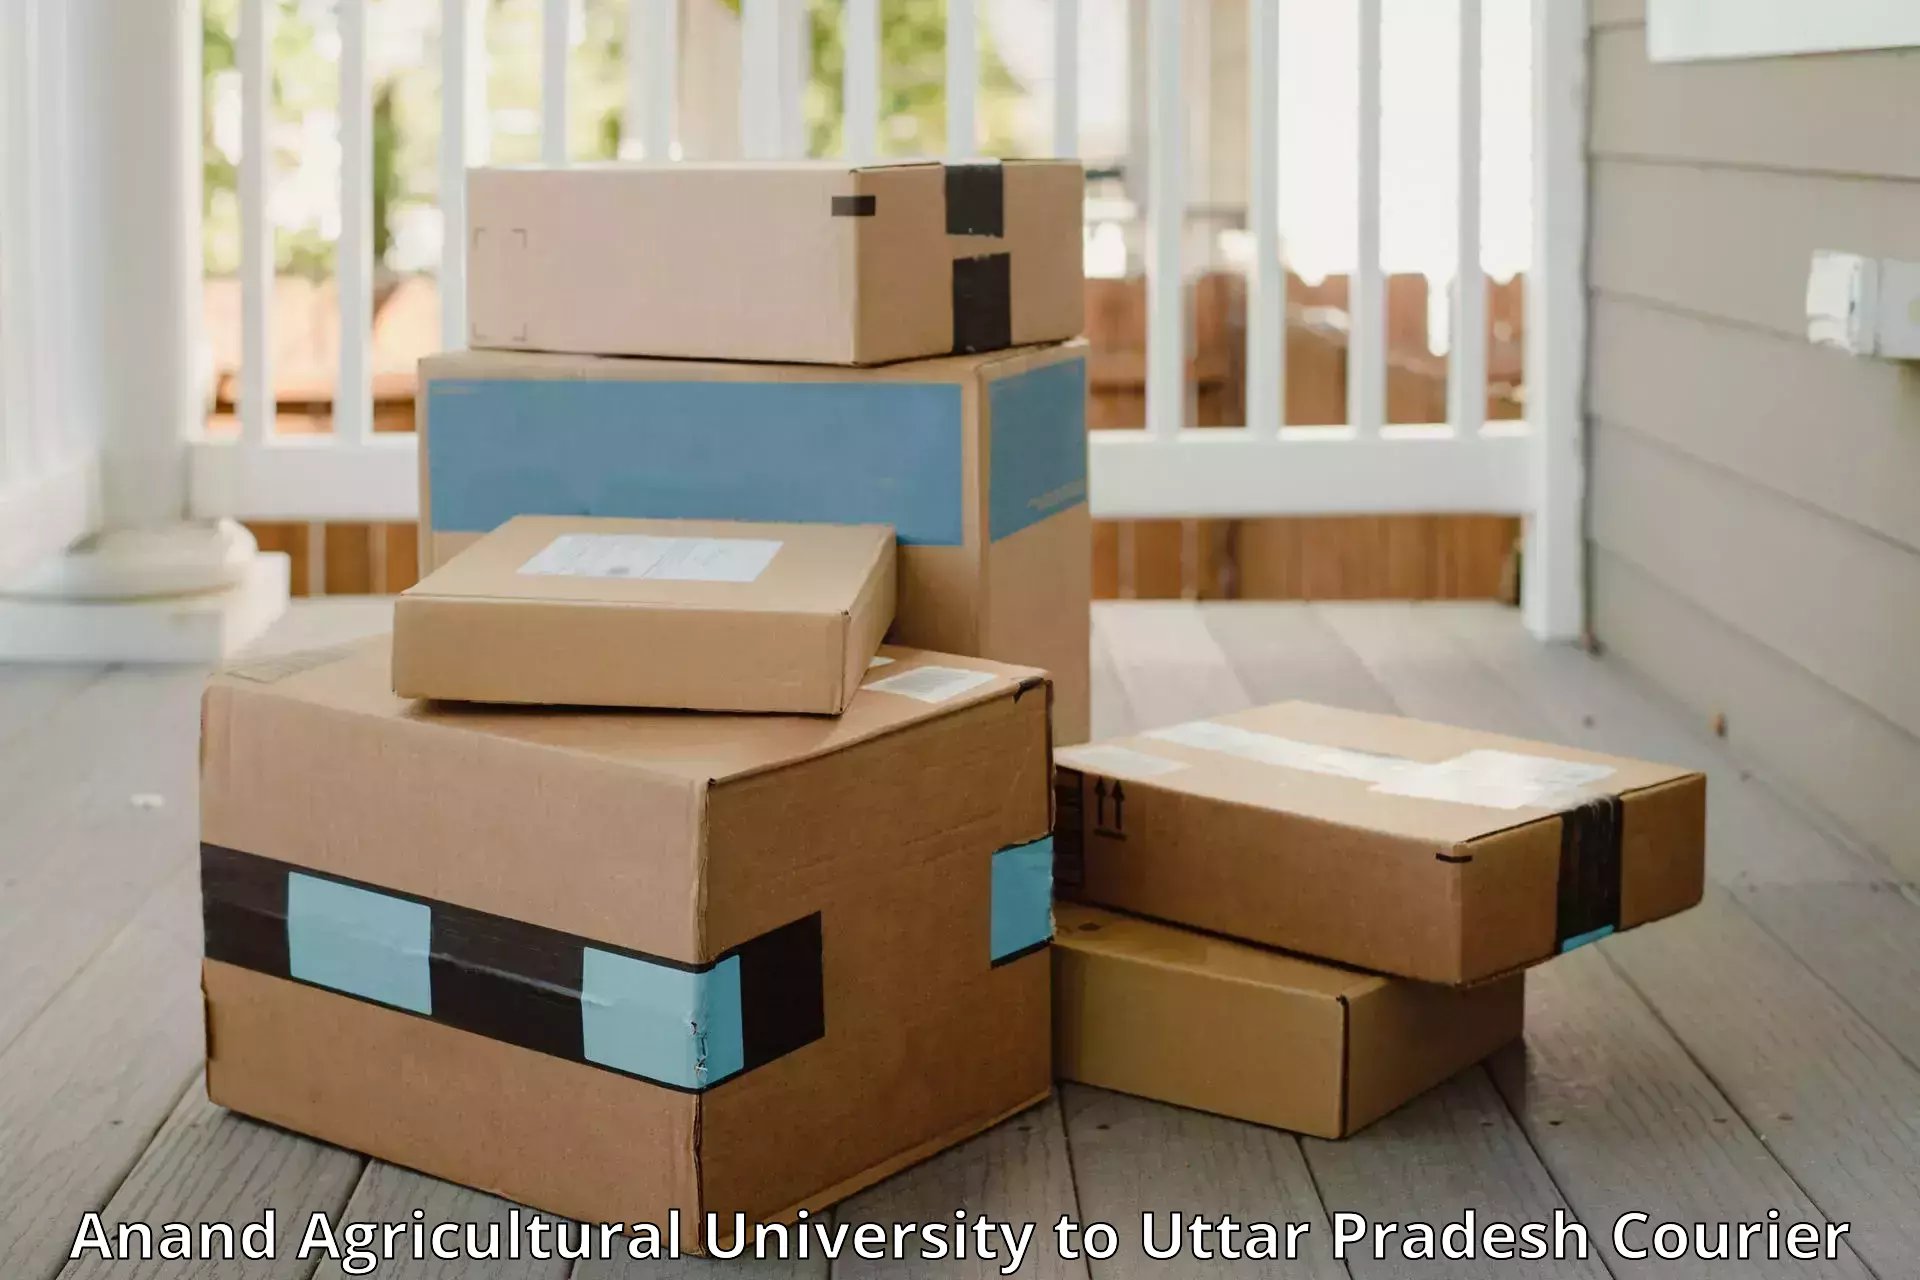 Instant baggage transport quote Anand Agricultural University to Barabanki